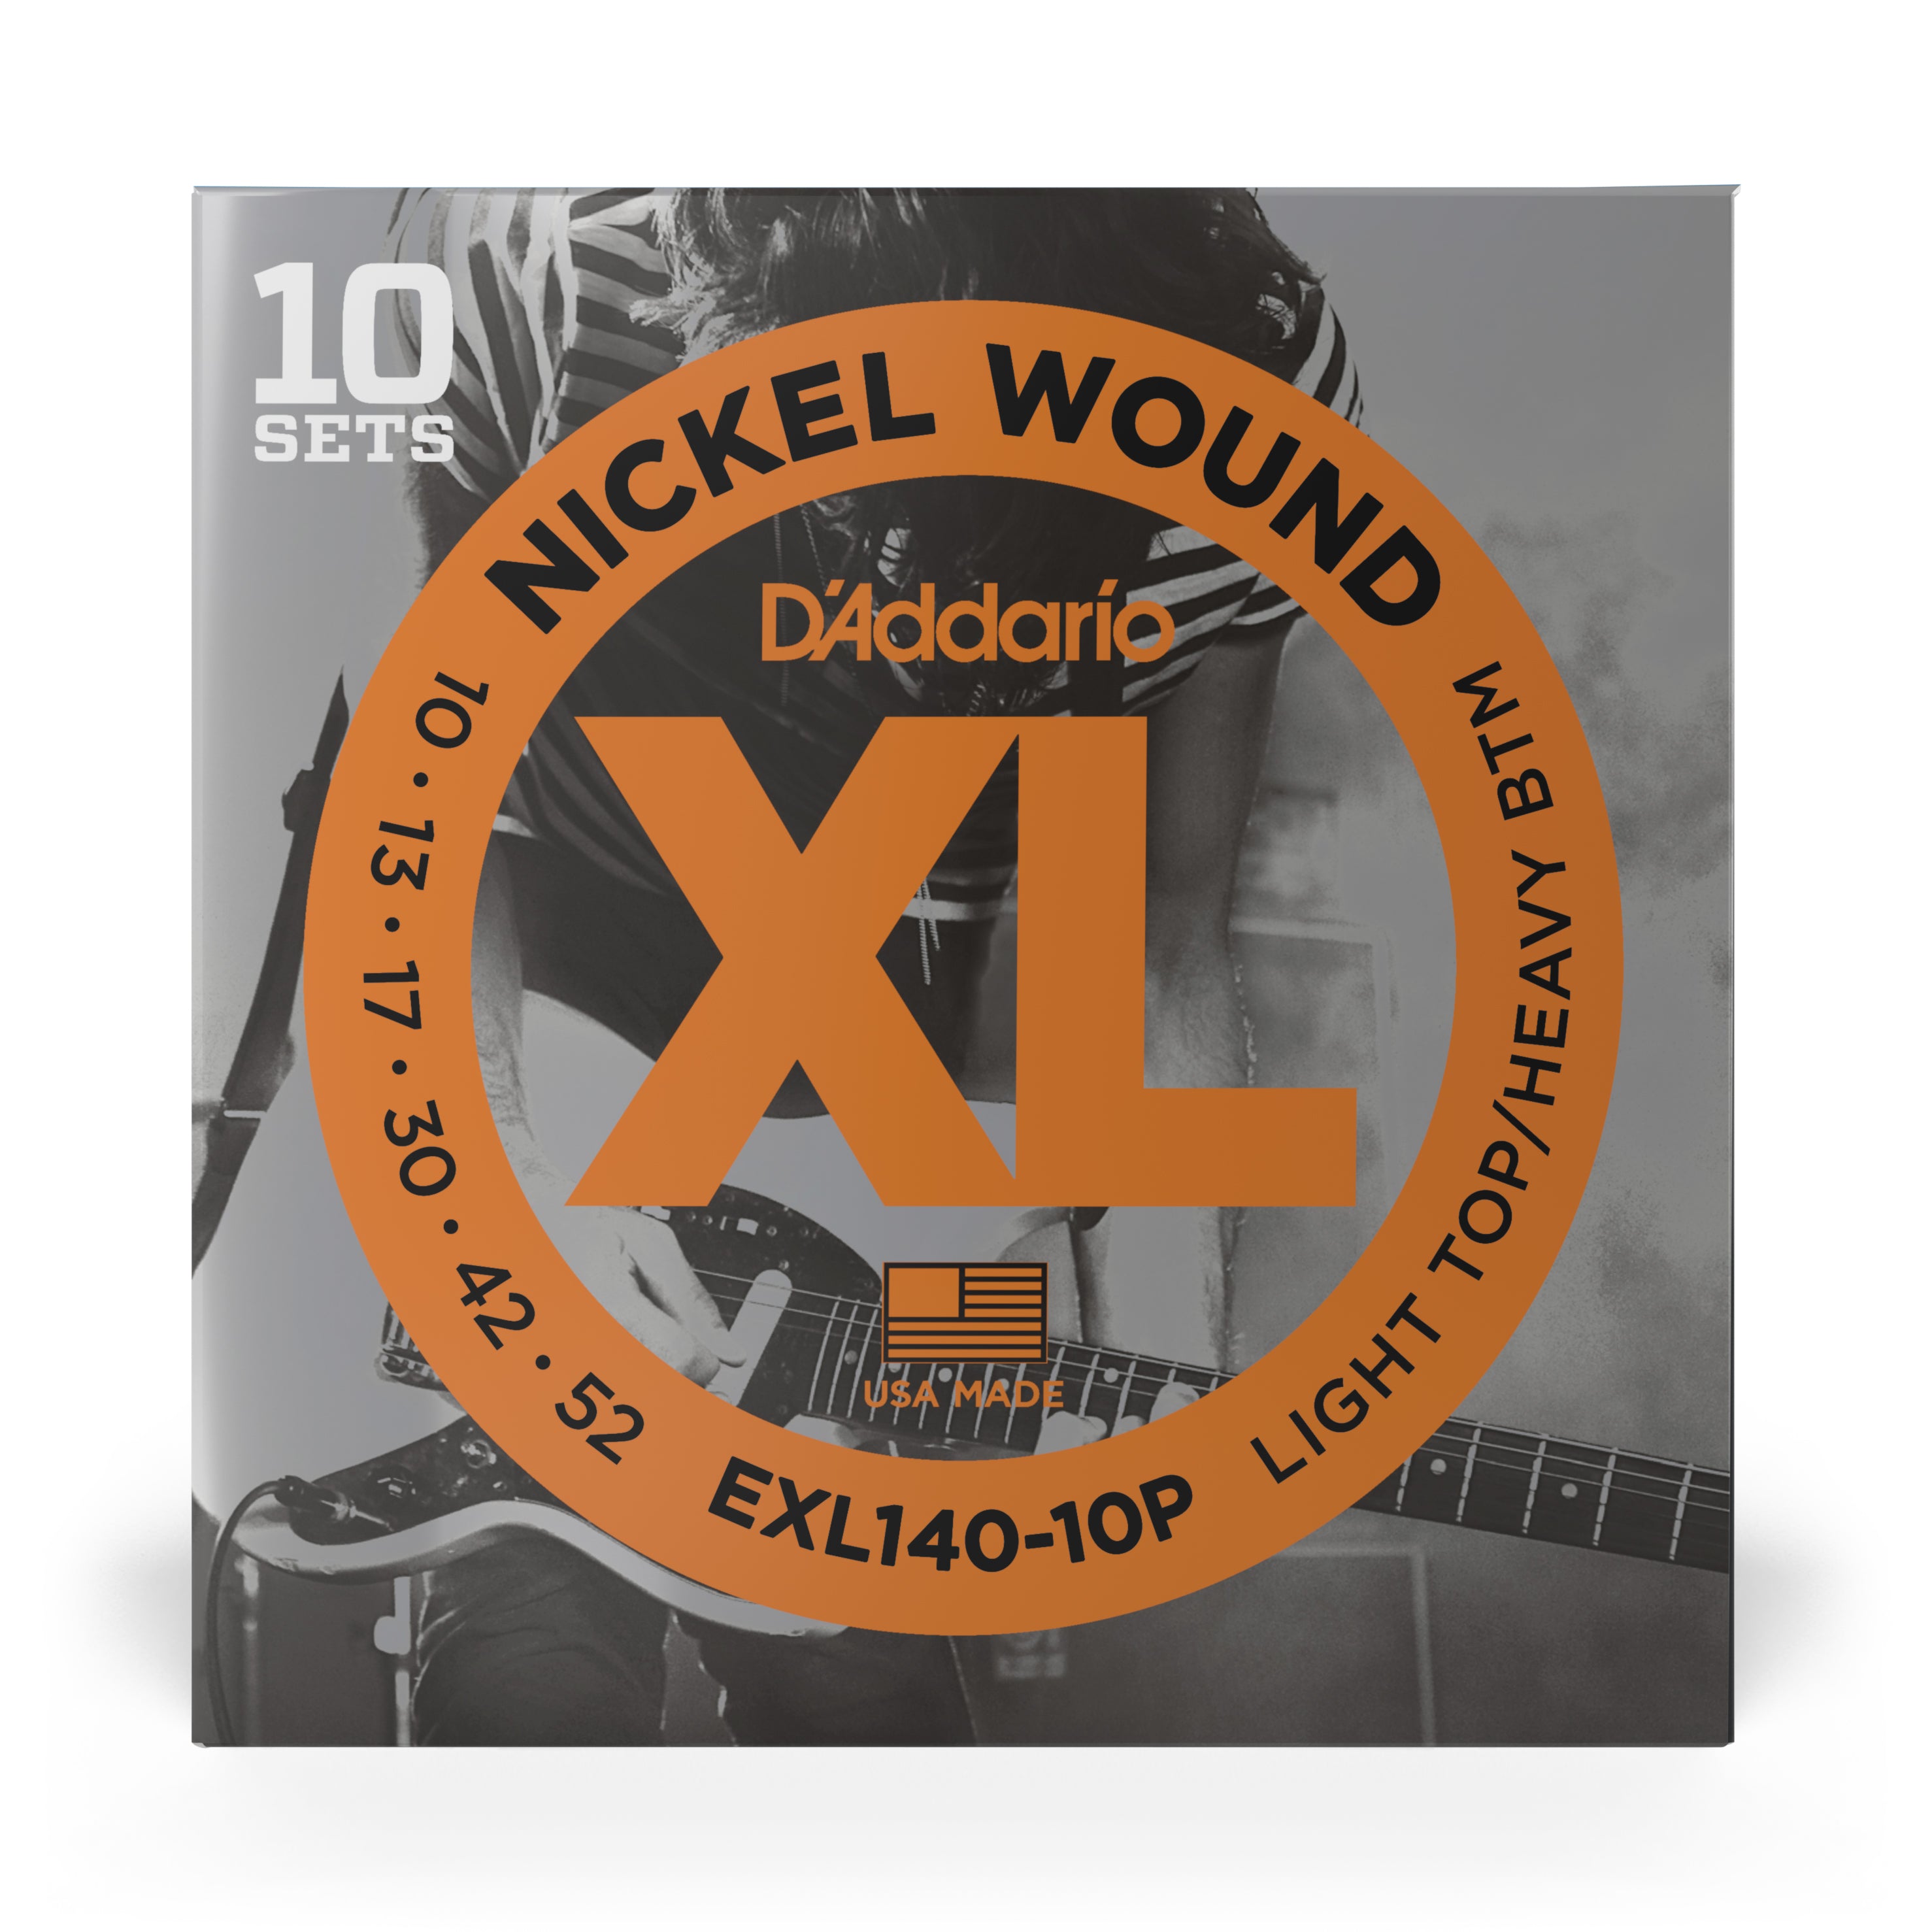 D'Addario EXL140-10P Nickel Wound 10-52 Electric Guitar Strings, Light Top Heavy Bottom, 10-Pack